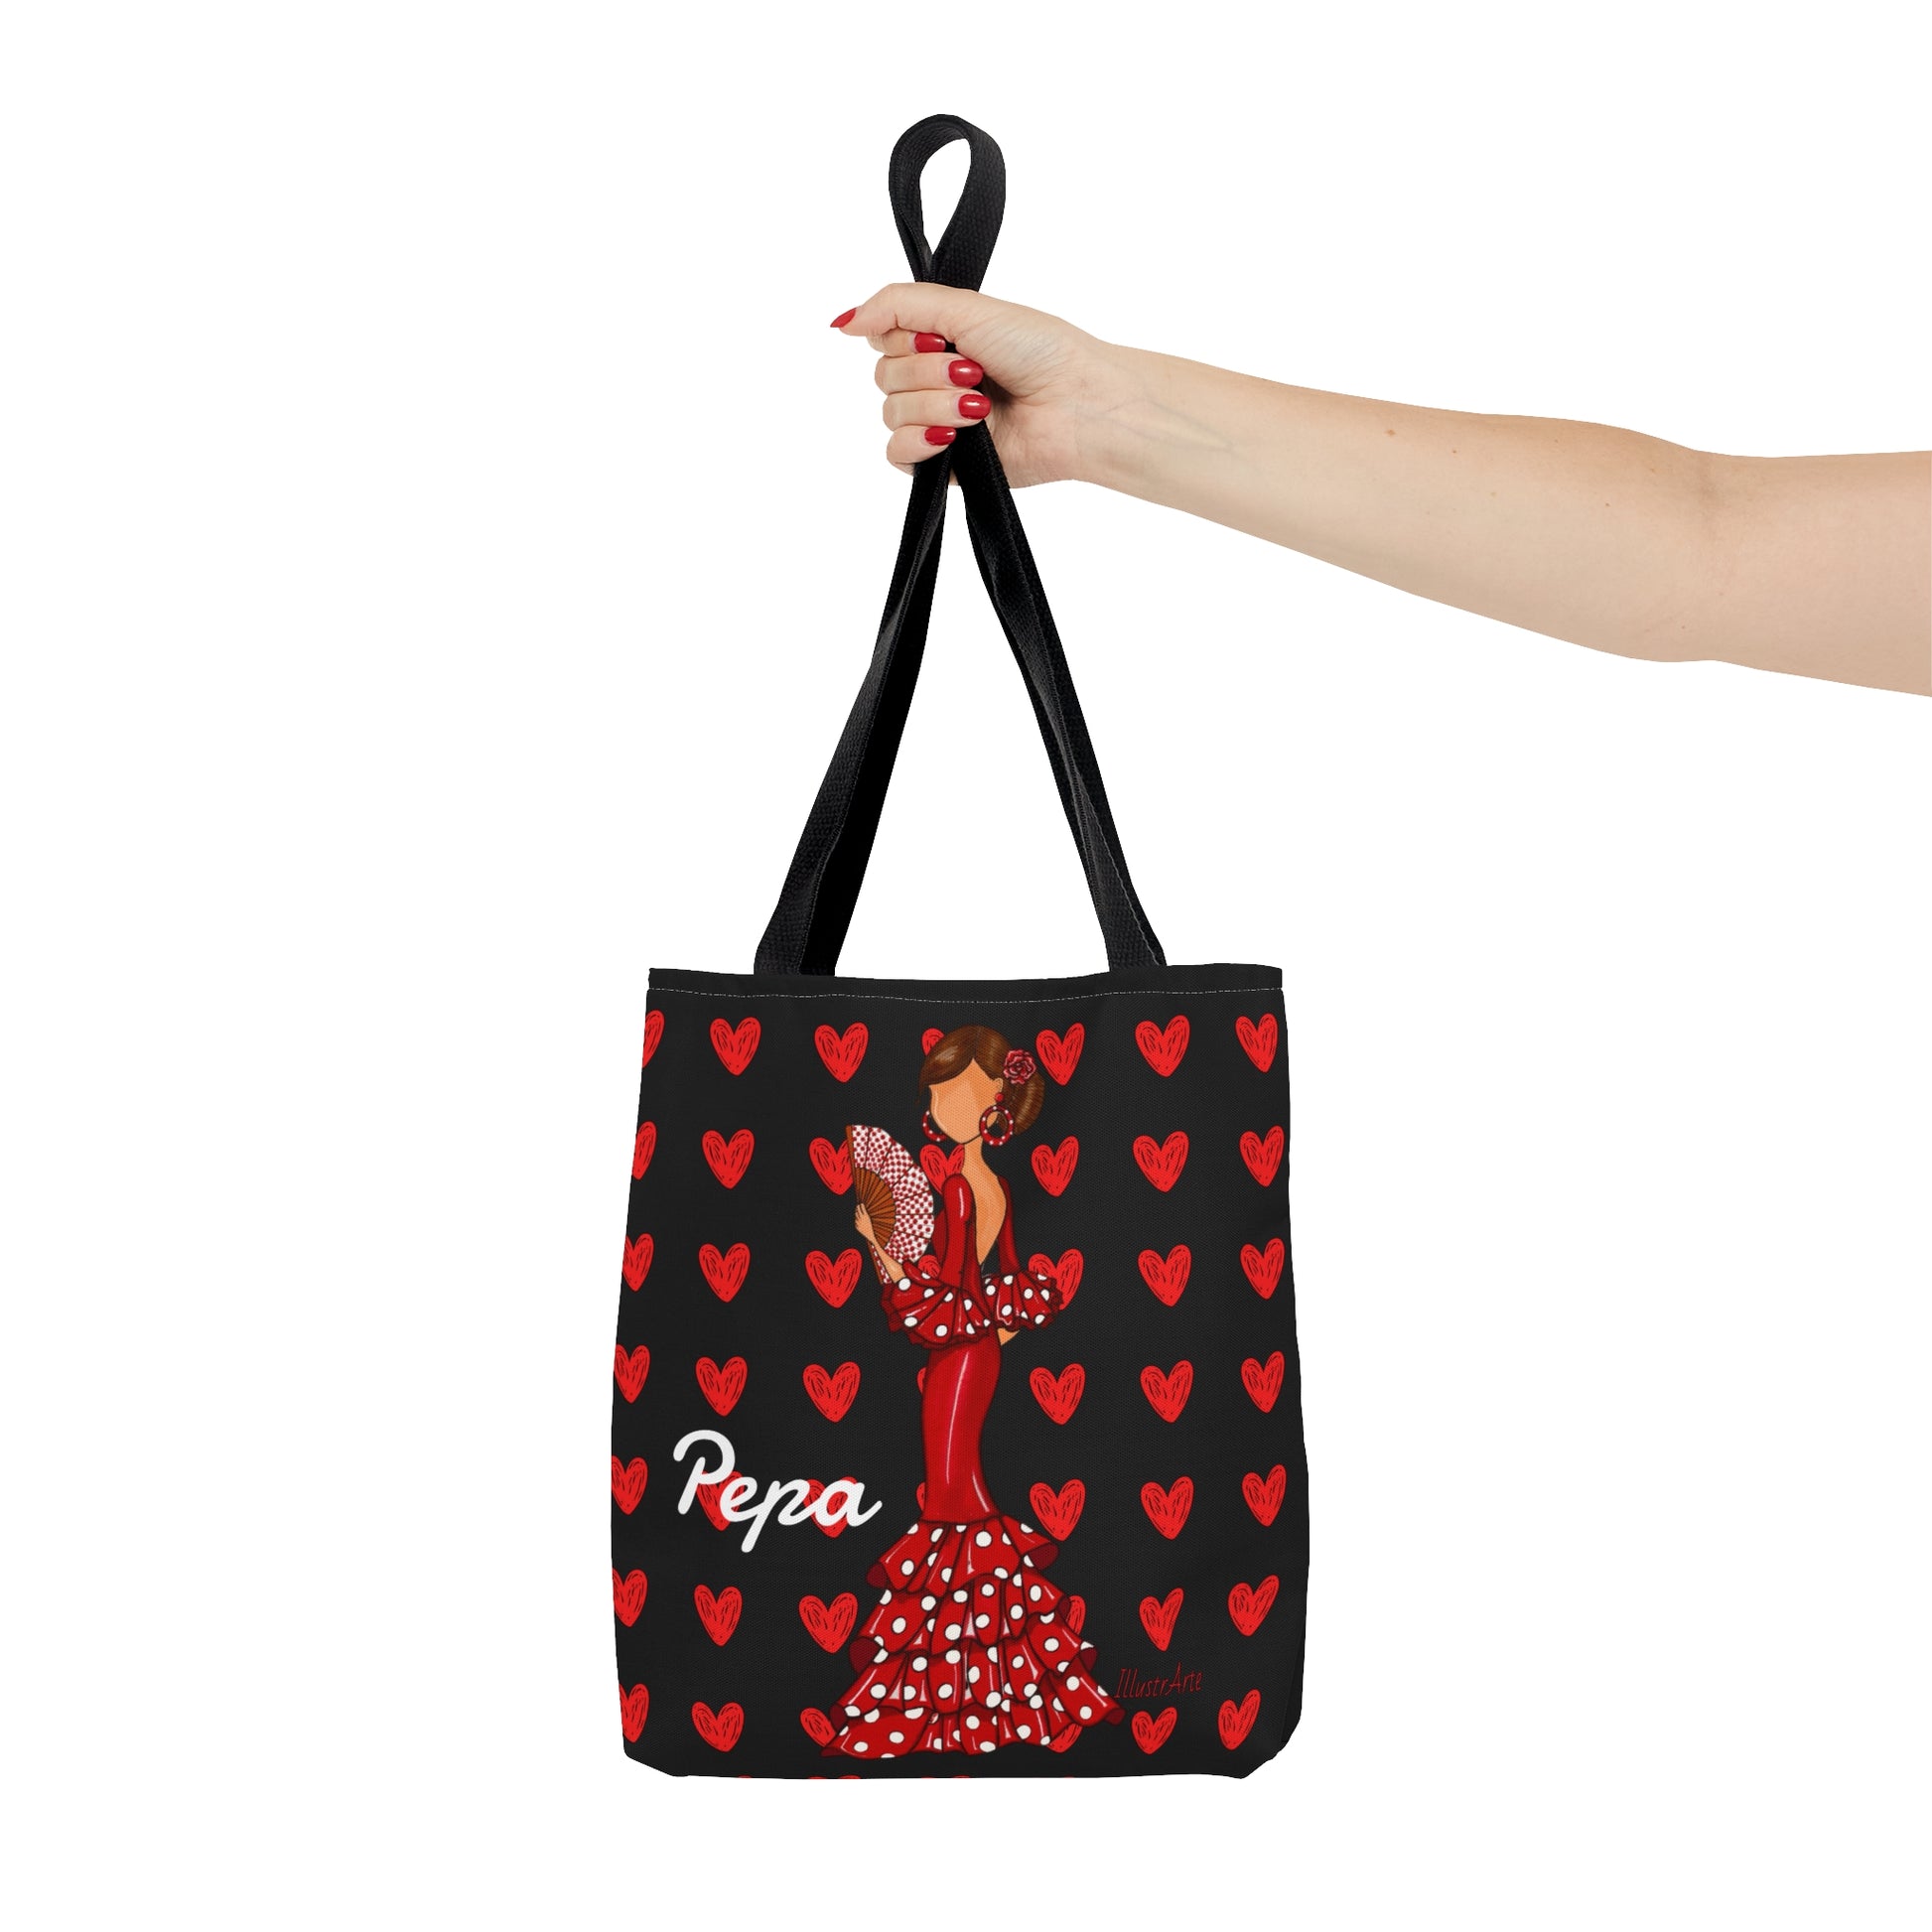 a woman's hand holding a black and red bag with a picture of a